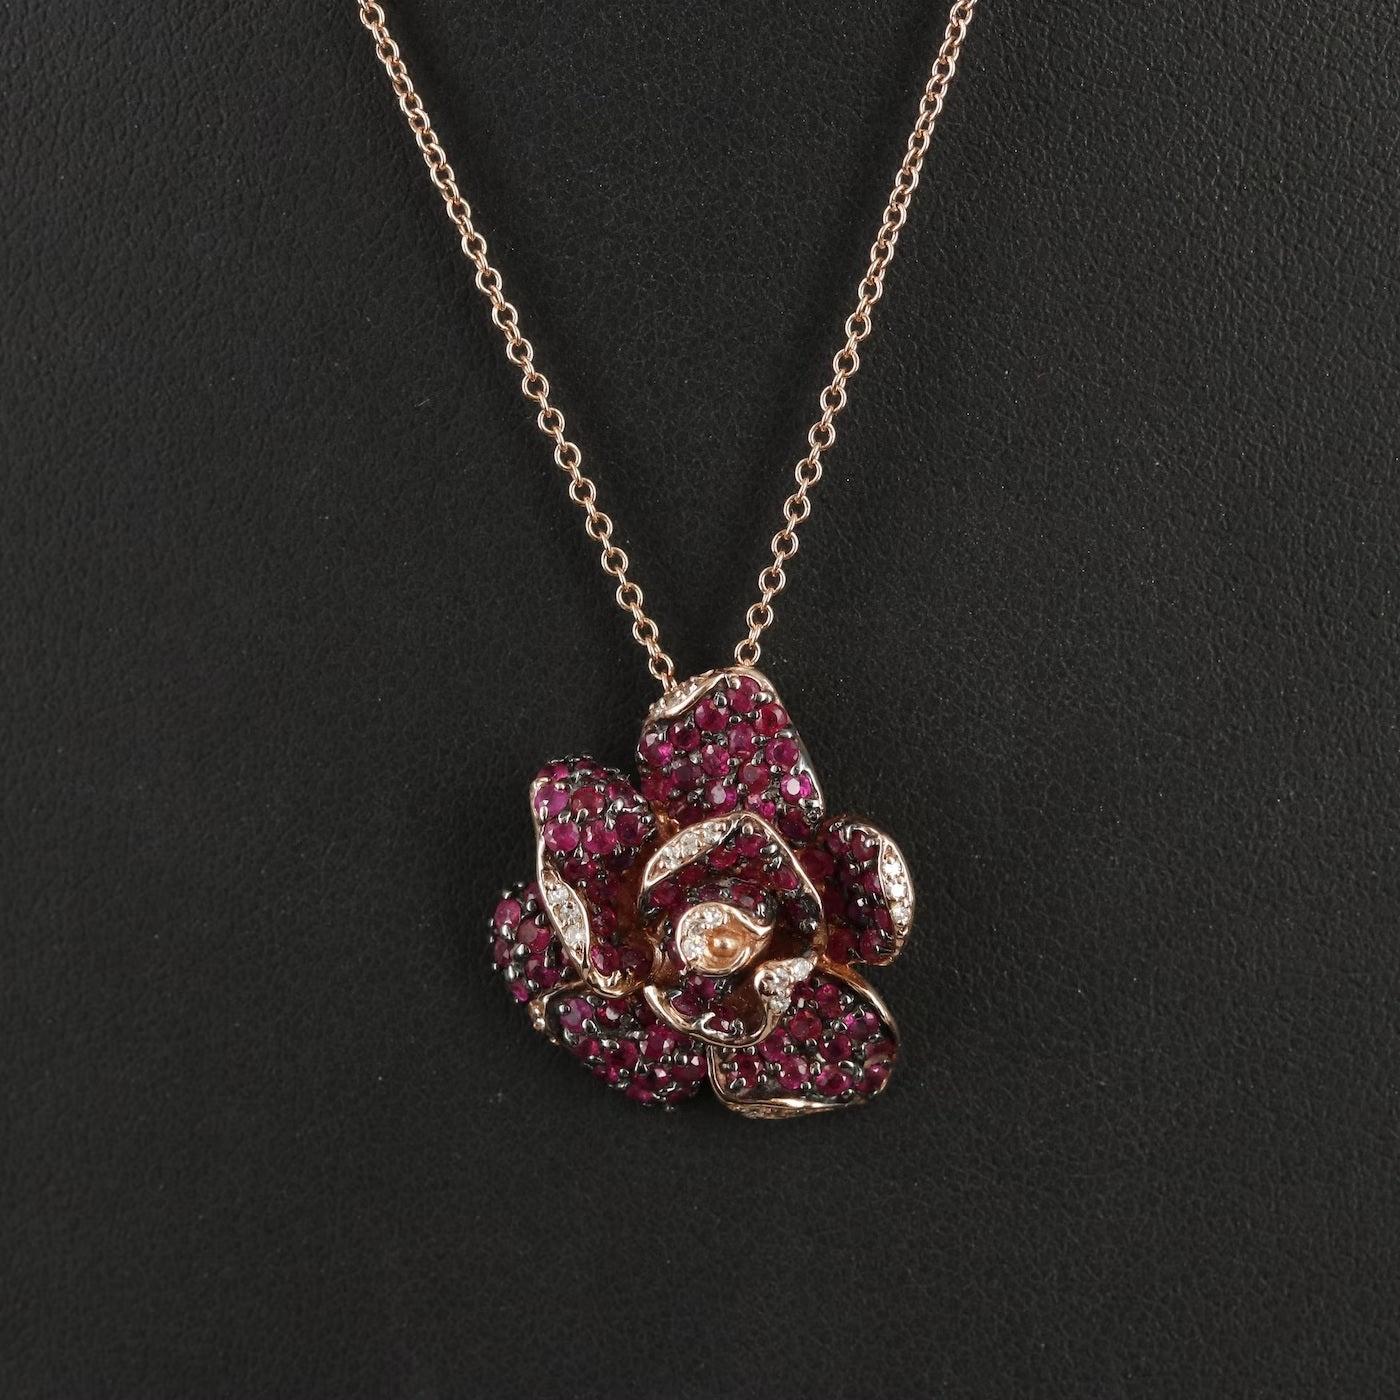 $4750 / New / EFFY 2.31 CT Ruby & Diamond Flower Earrings and necklace set/ 14K 1